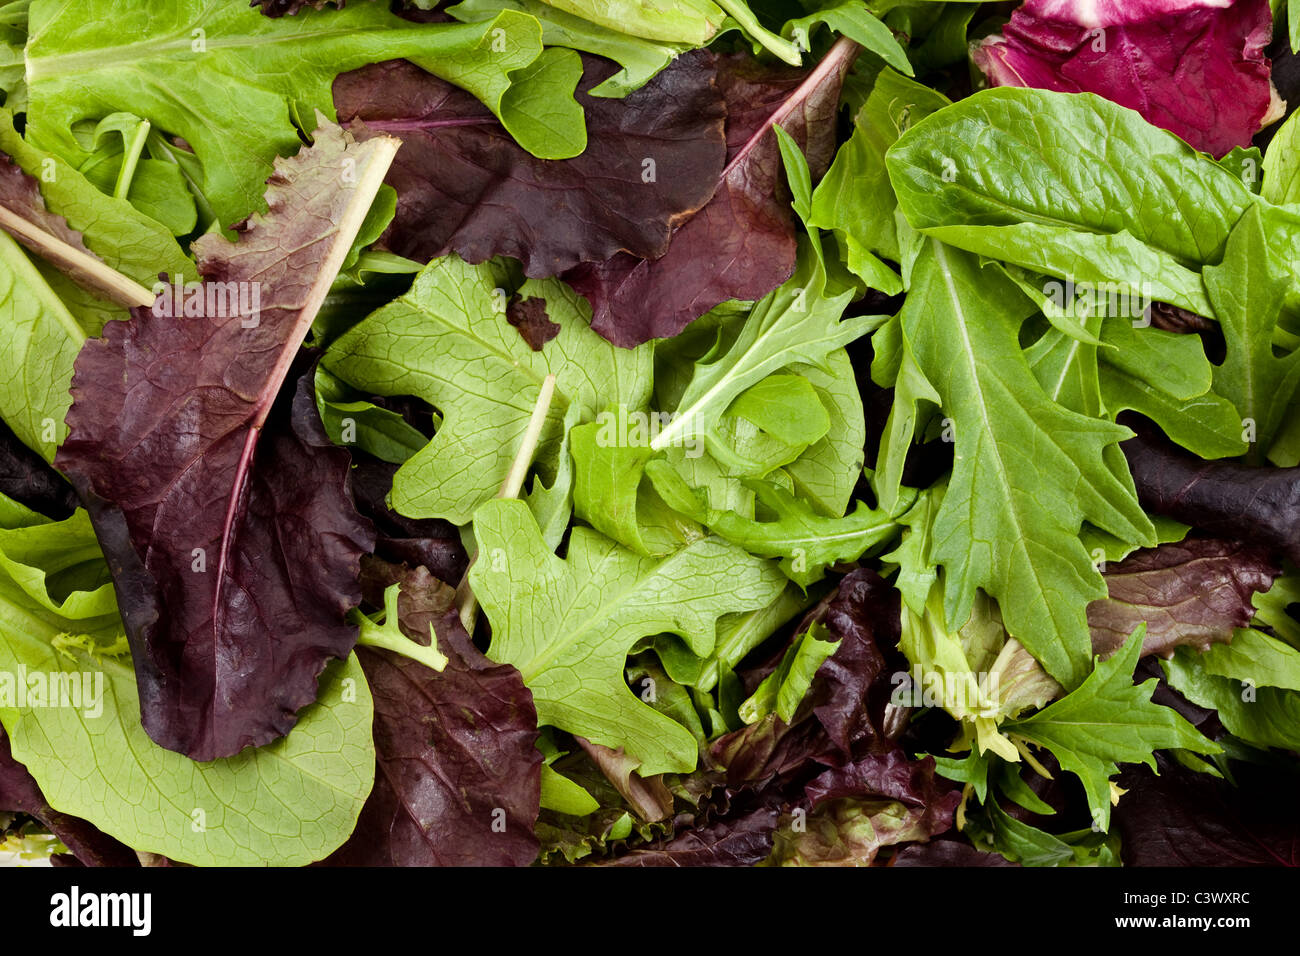 Spinach, red leaf lettuces, mizuna for background Stock Photo